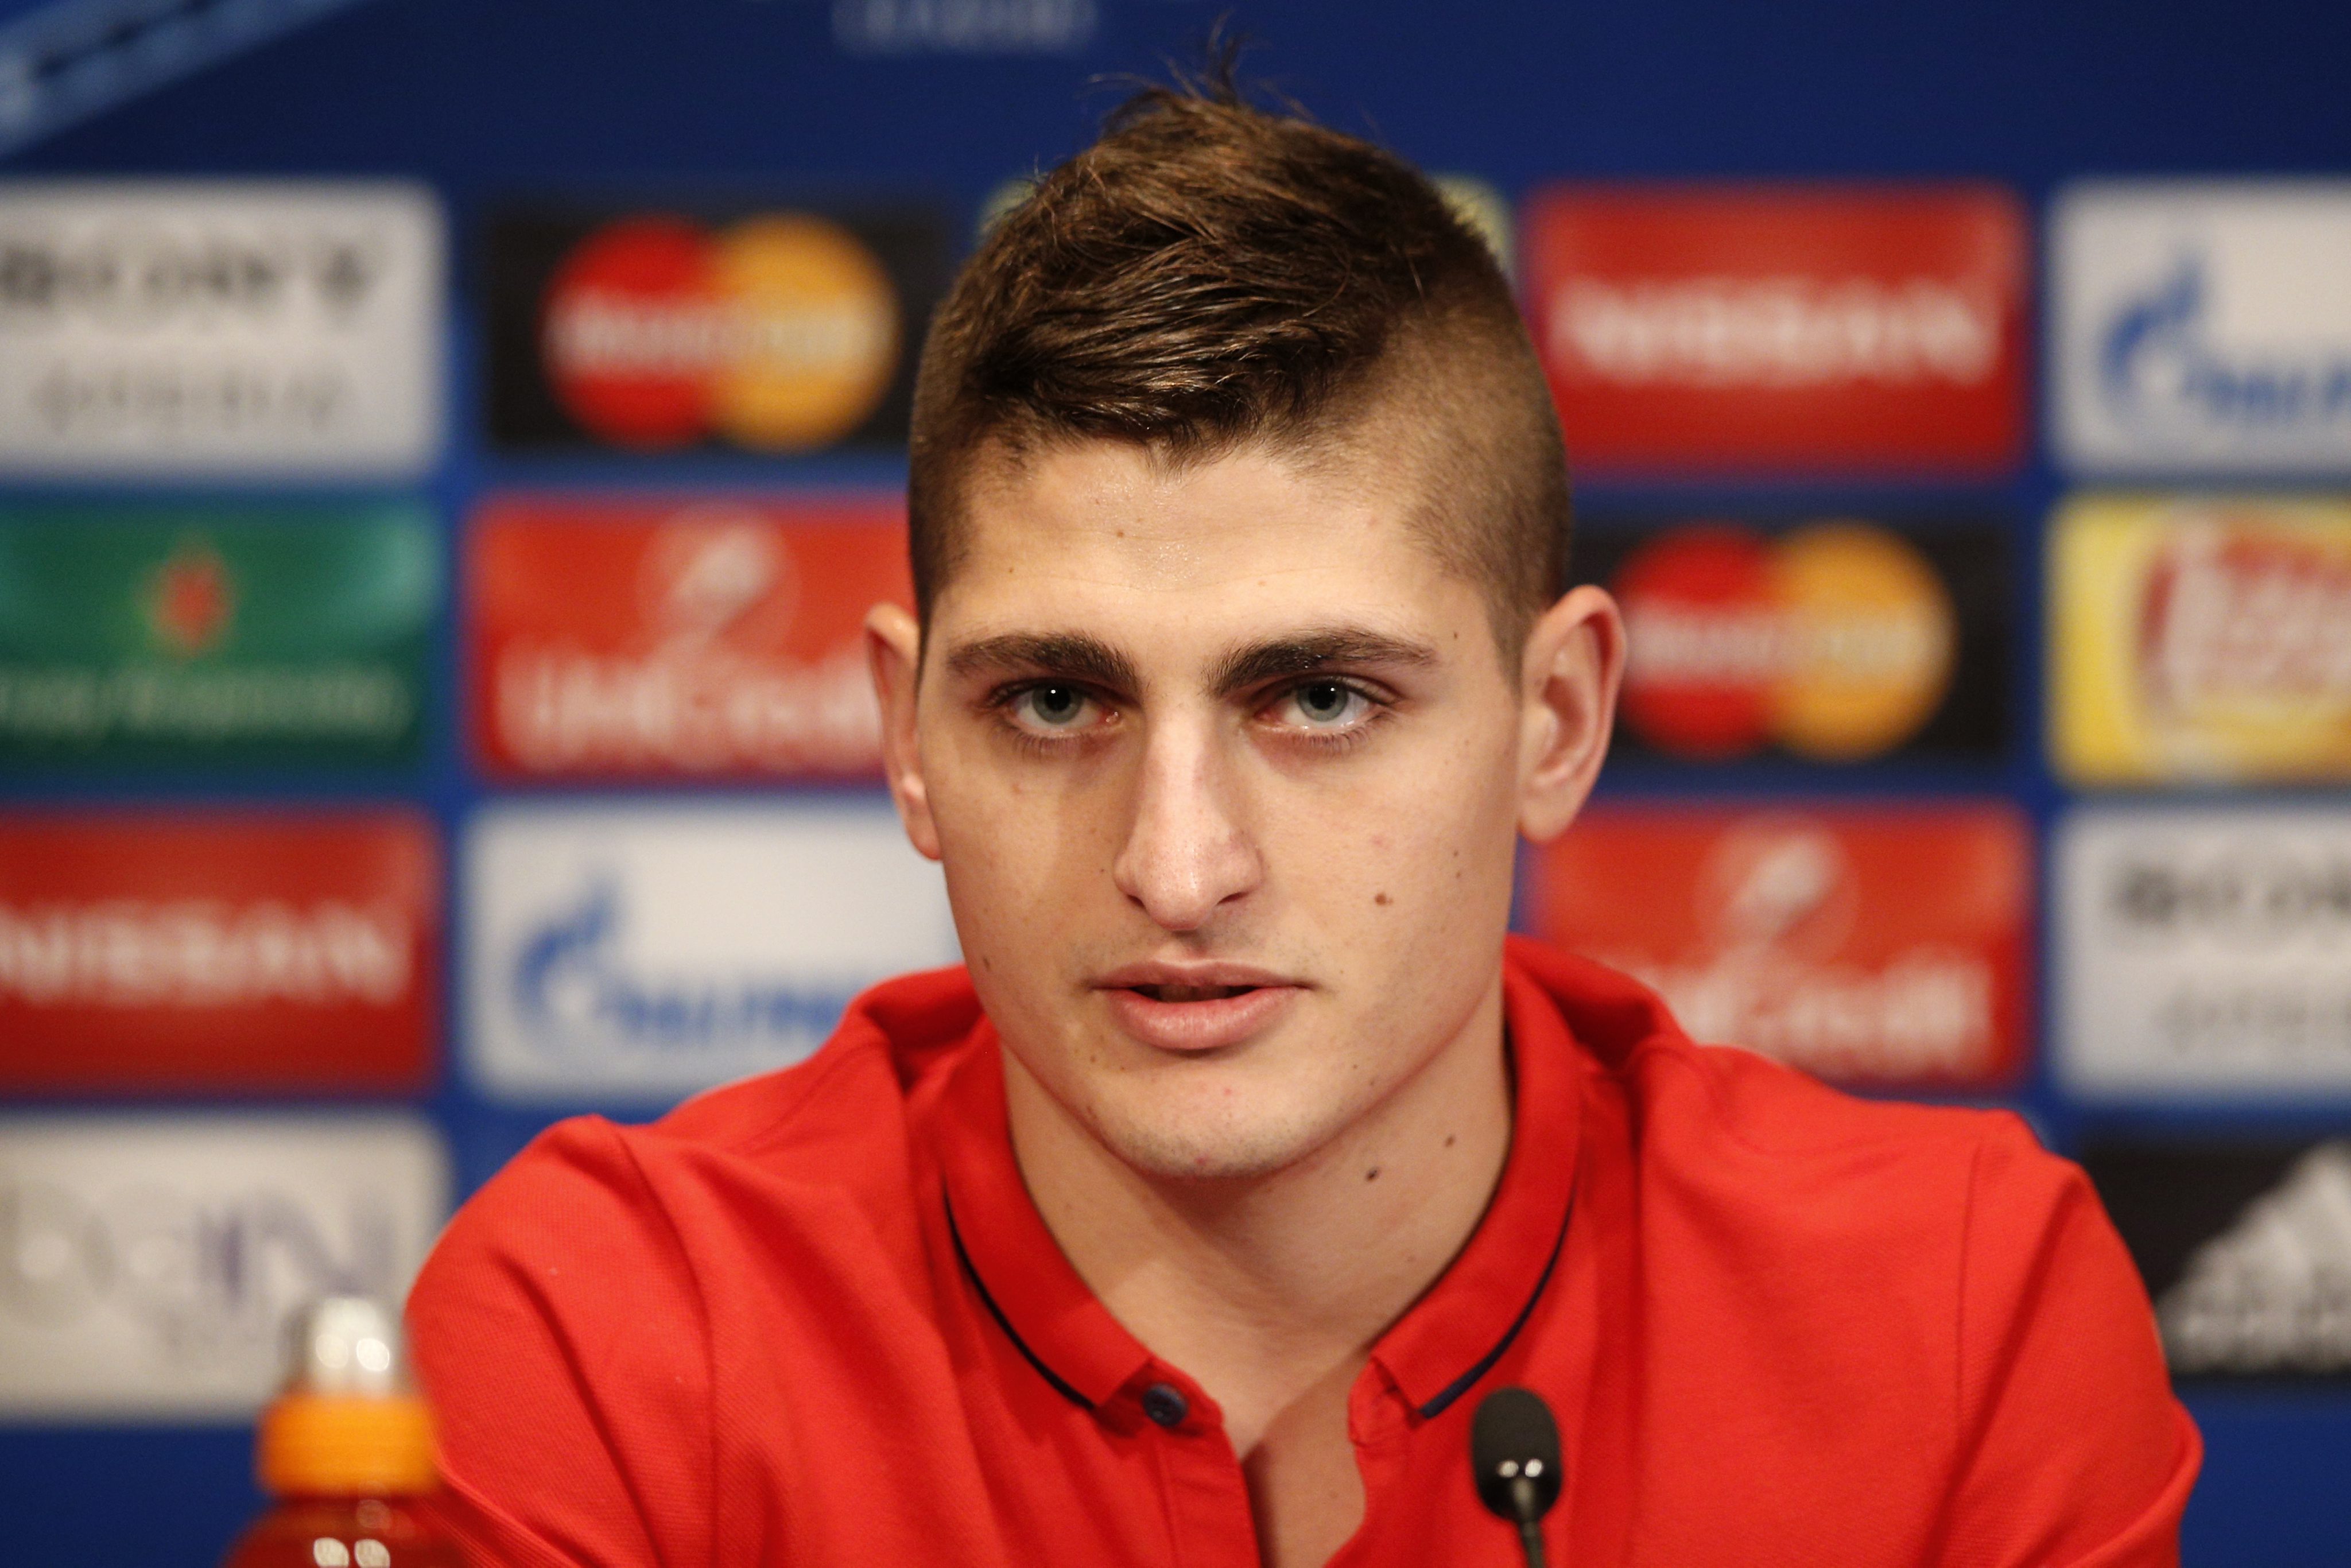 epa05162302 Midfielder of Paris Saint-Germain Marco Verratti speaks during a press conference at the Parc des Princes Stadium in Paris, France, 15 February 2016. Paris Saint-Germain will play against Chelsea in an UEFA Champions League Round of 16 soccer match on 16 February.  EPA/YOAN VALAT